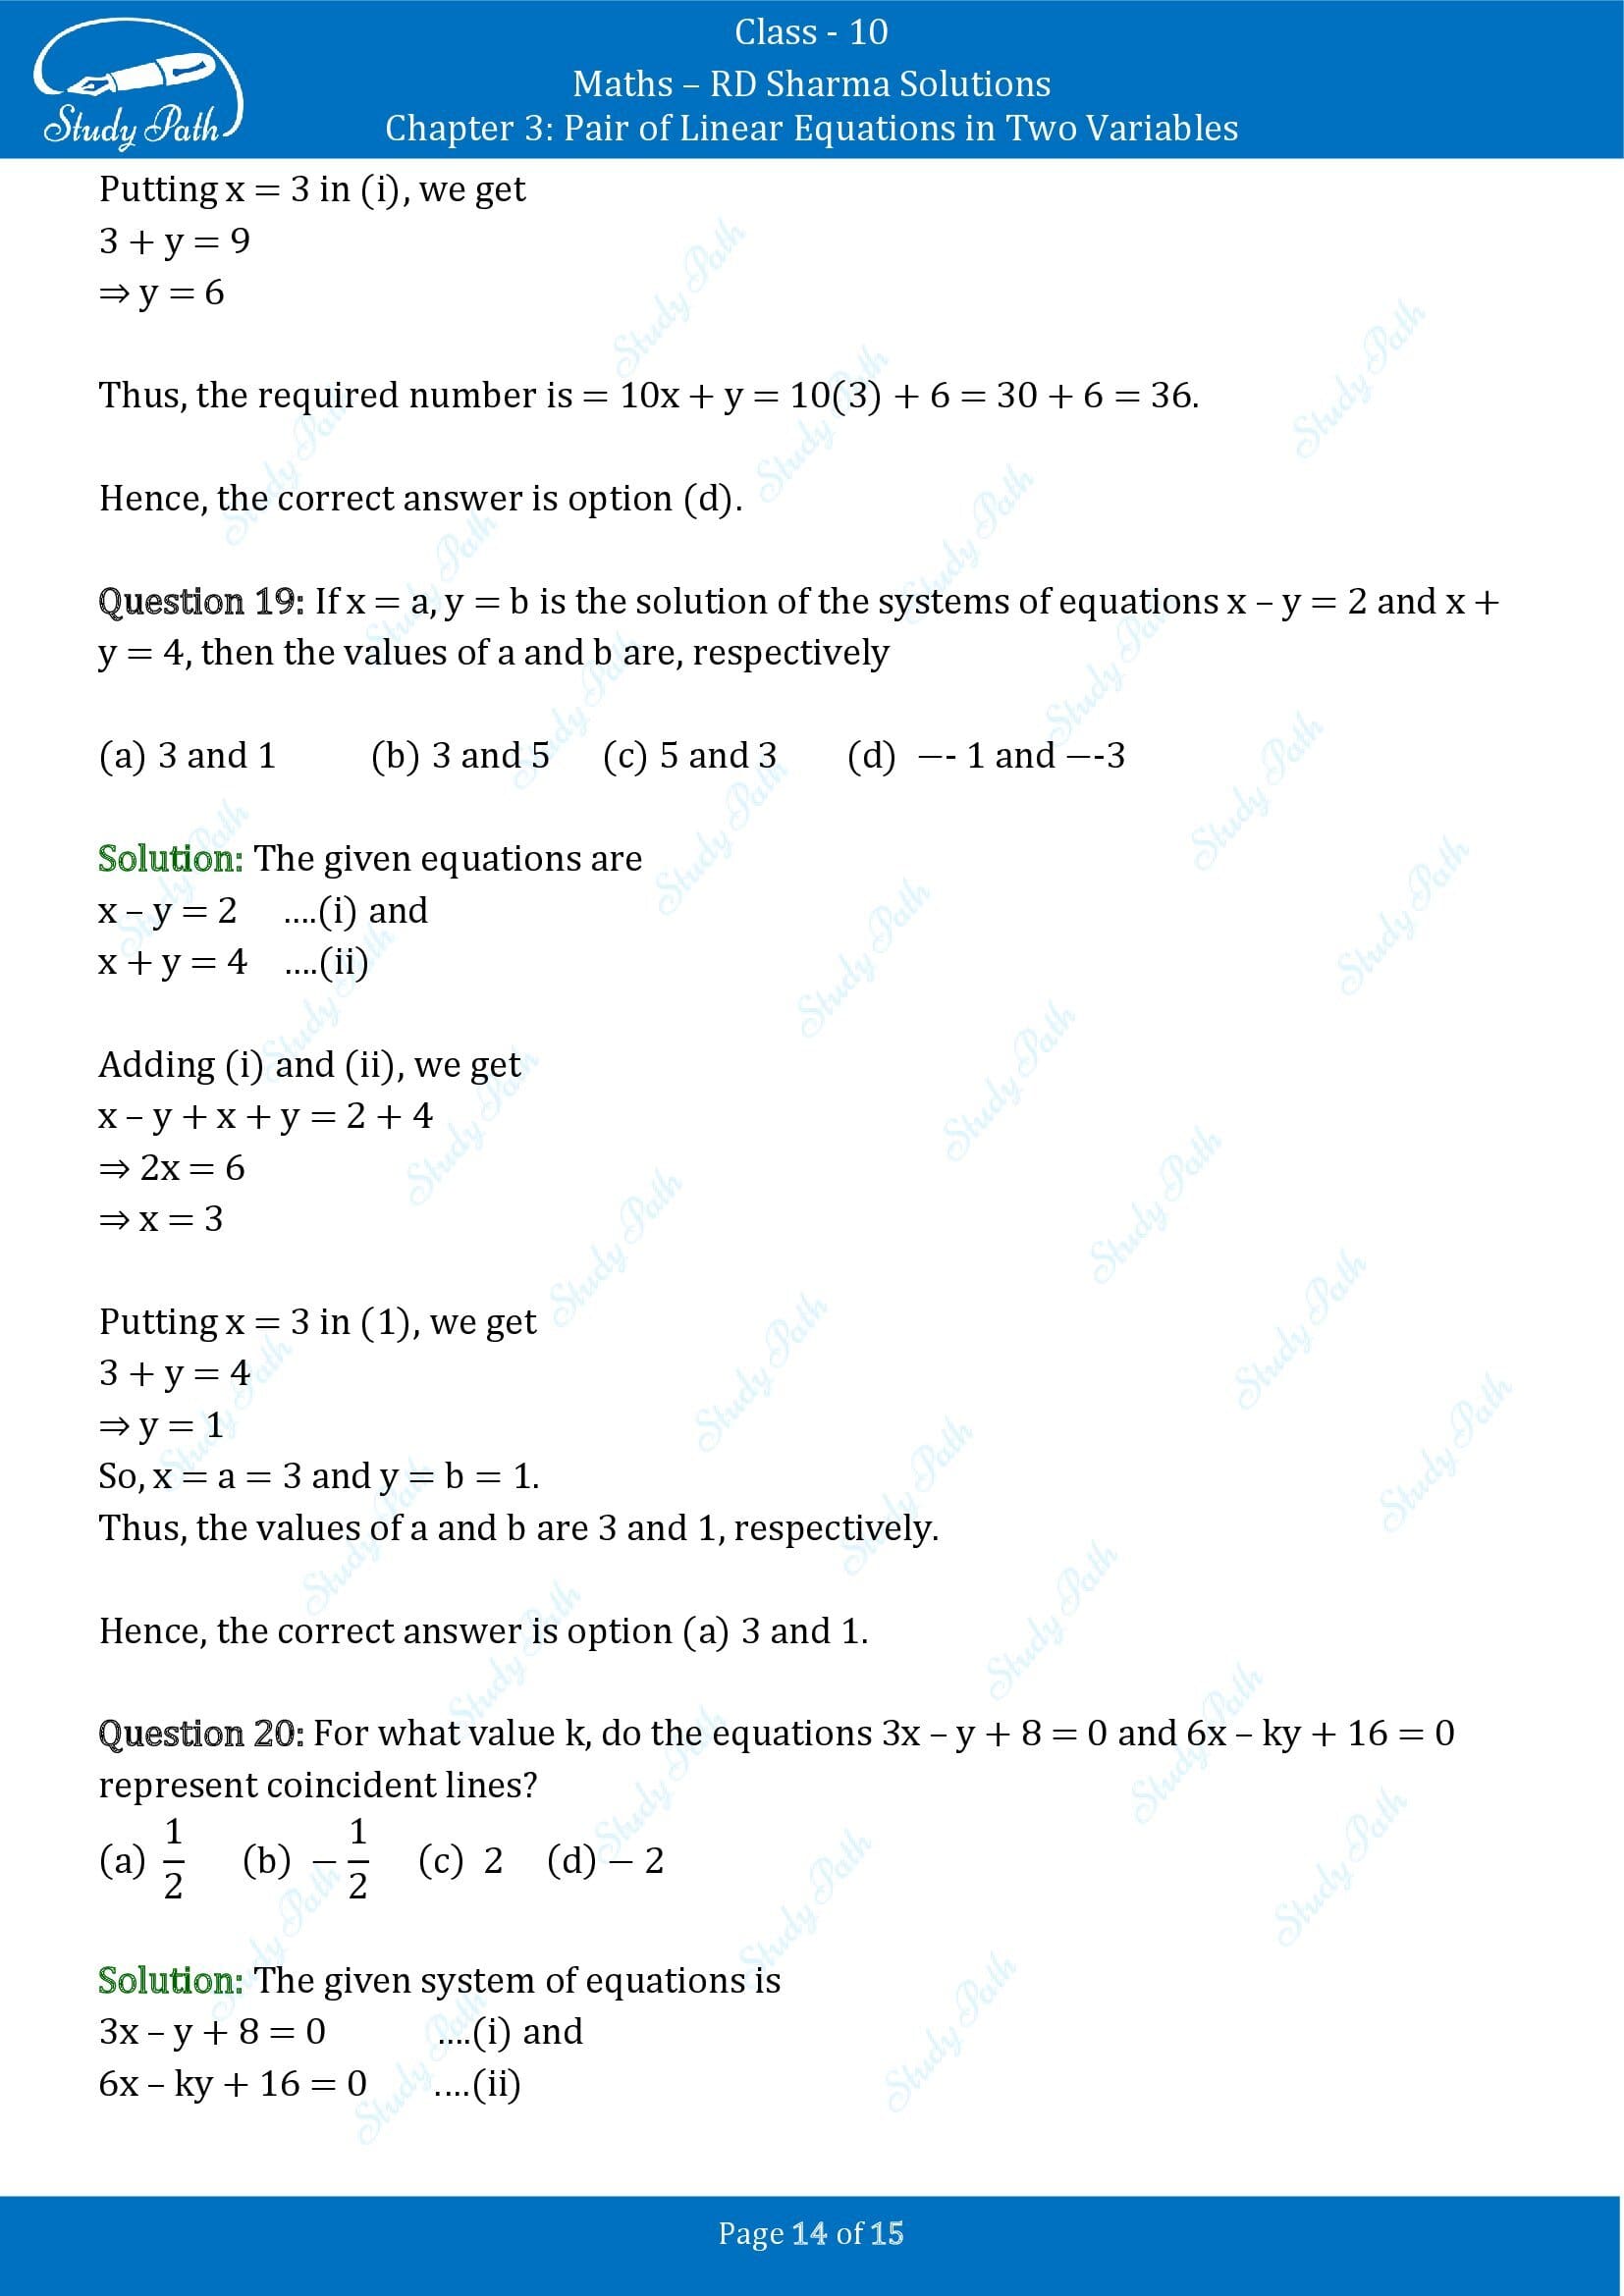 RD Sharma Solutions Class 10 Chapter 3 Pair of Linear Equations in Two Variables Multiple Choice Questions MCQs 00014